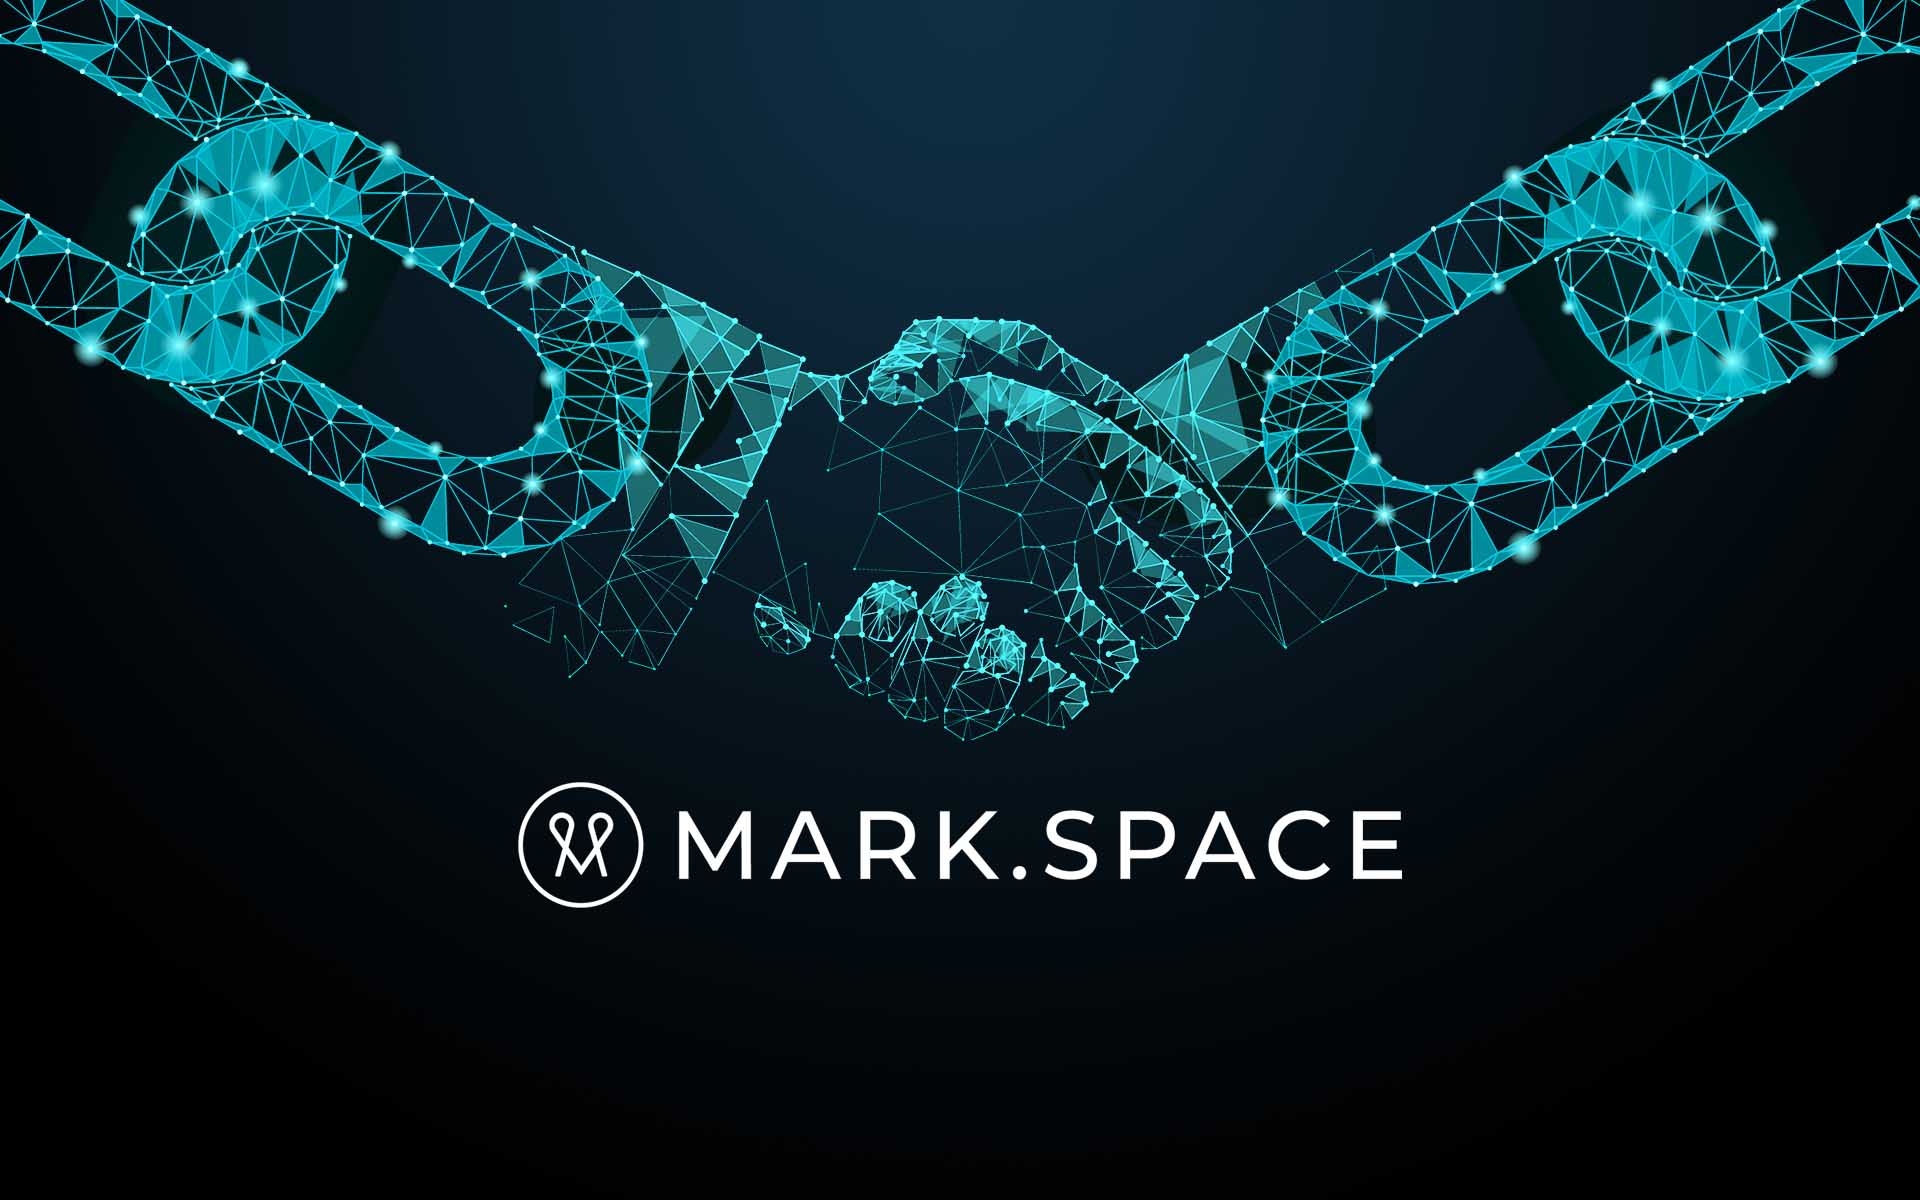 MARK.SPACE Raises Hopes of a Lucrative Alliance between VR and E-Commerce through its Revolutionary Blockchain Powered Ecosystem